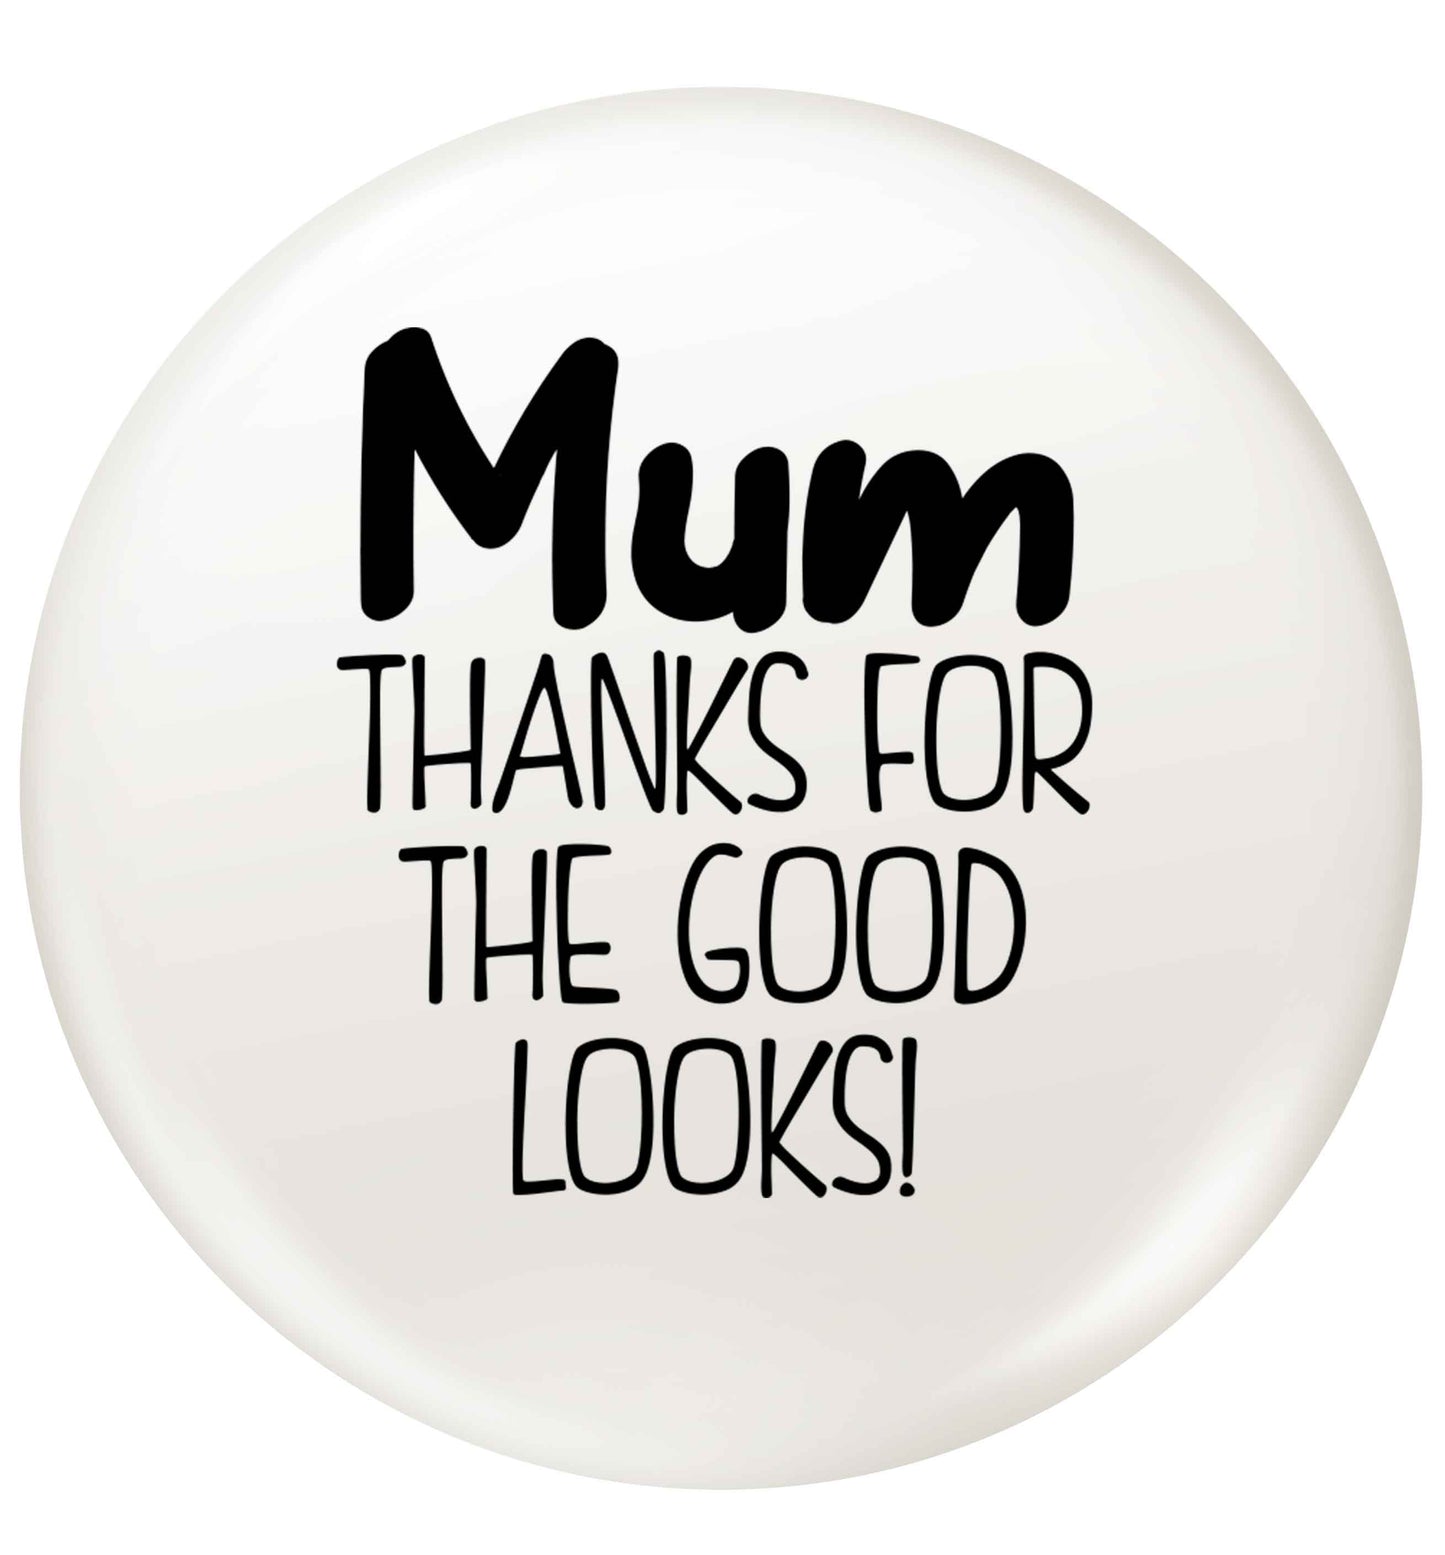 Mum thanks for the good looks! small 25mm Pin badge